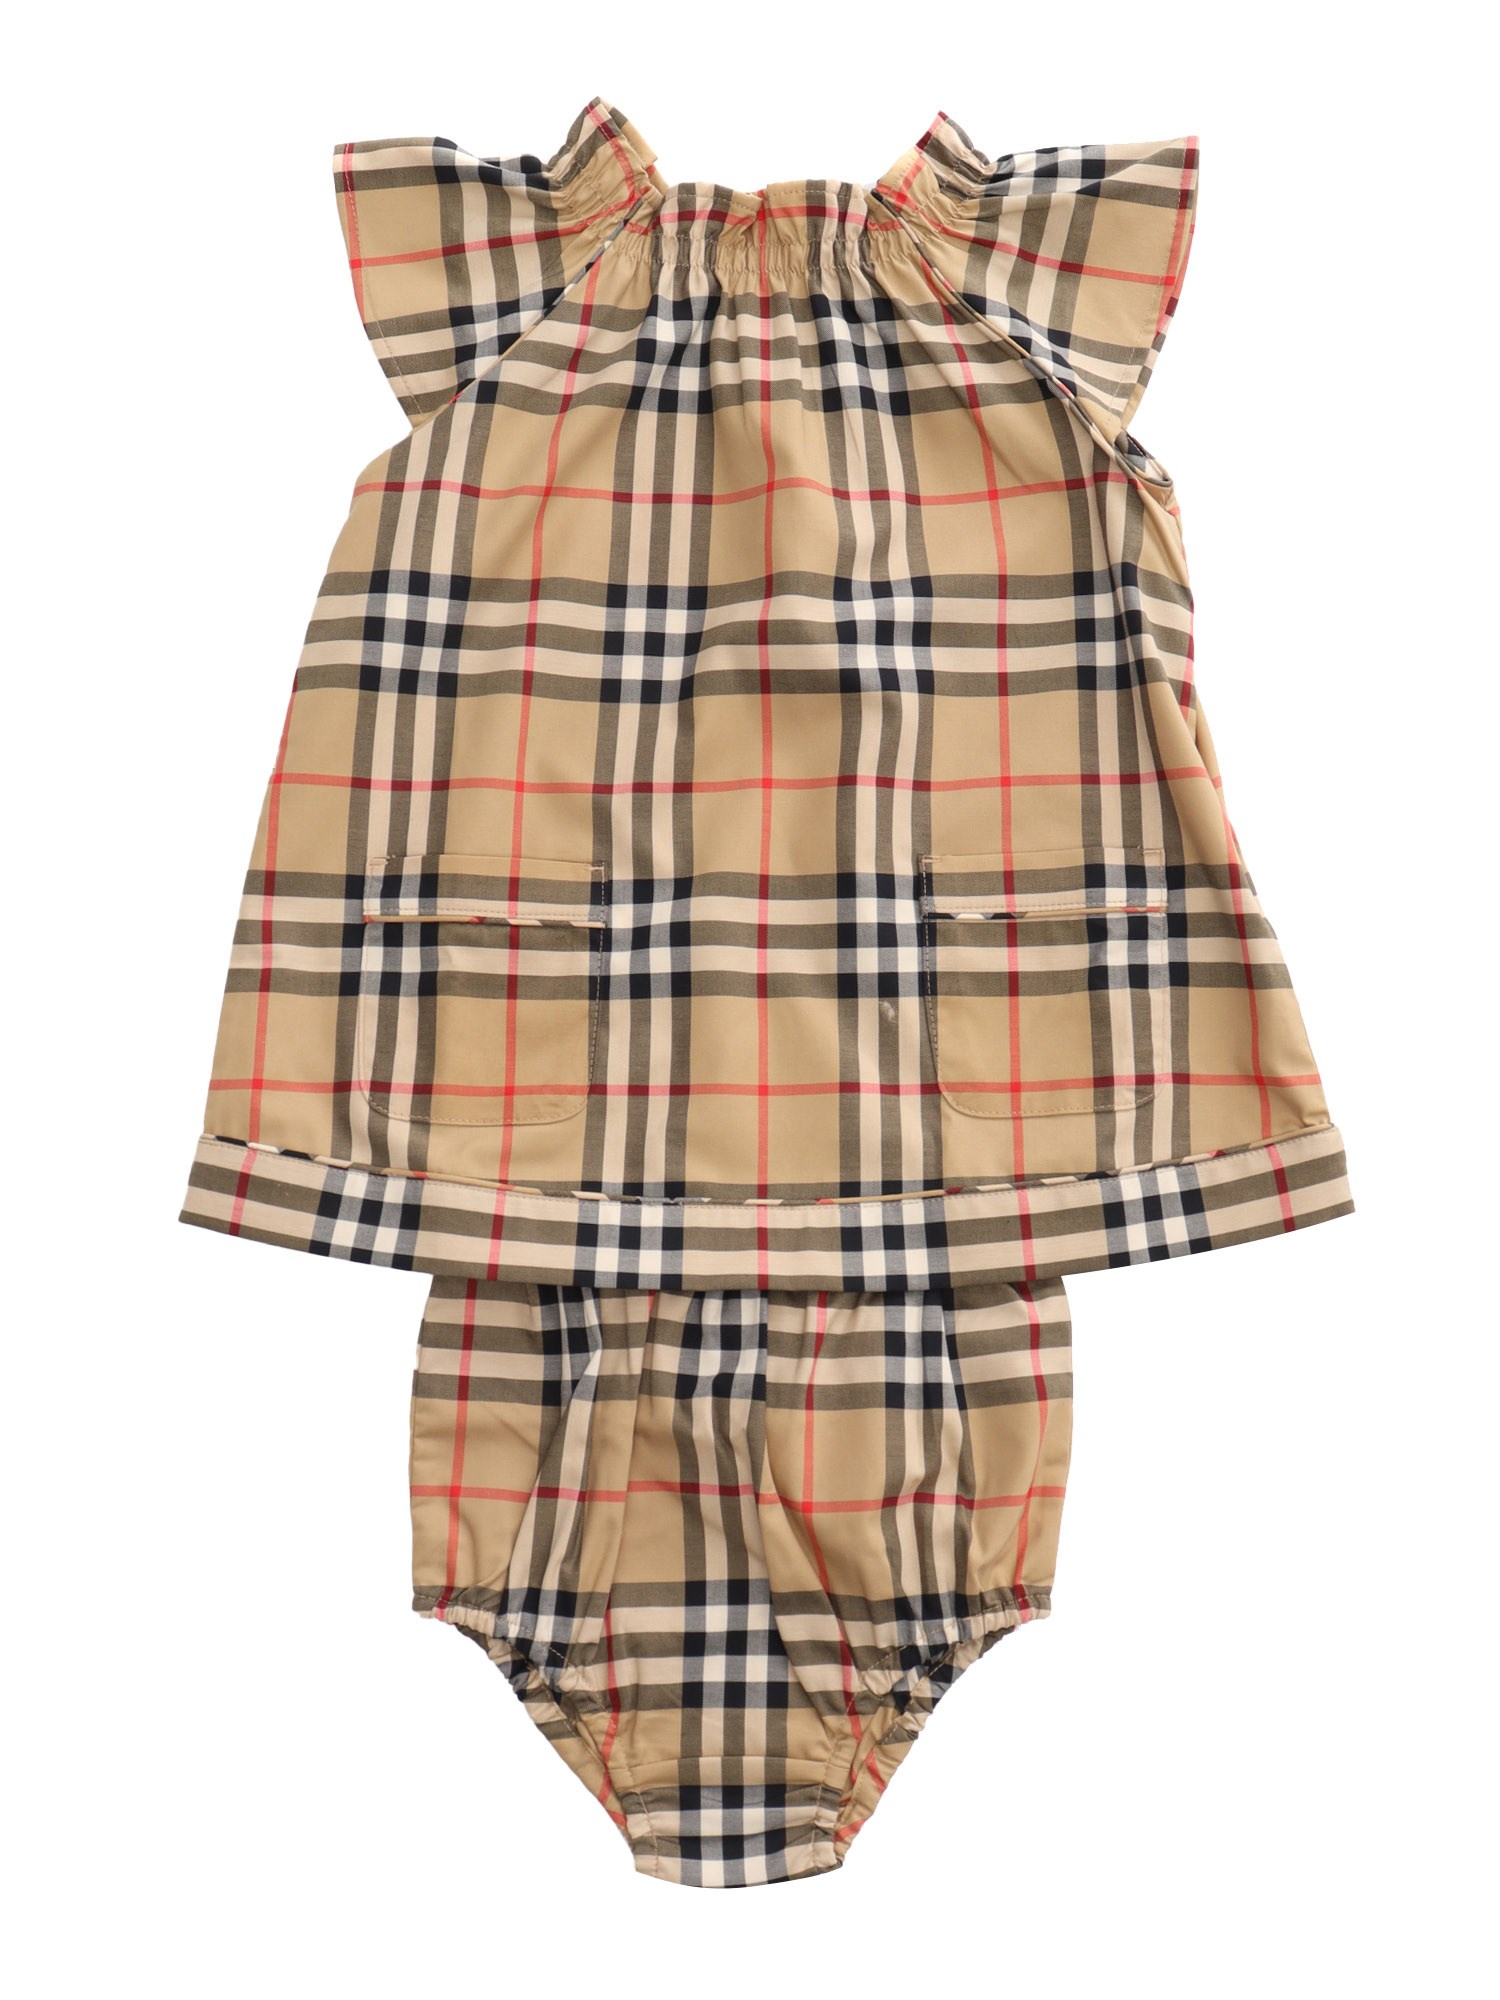 Burberry Check Dress In Beige